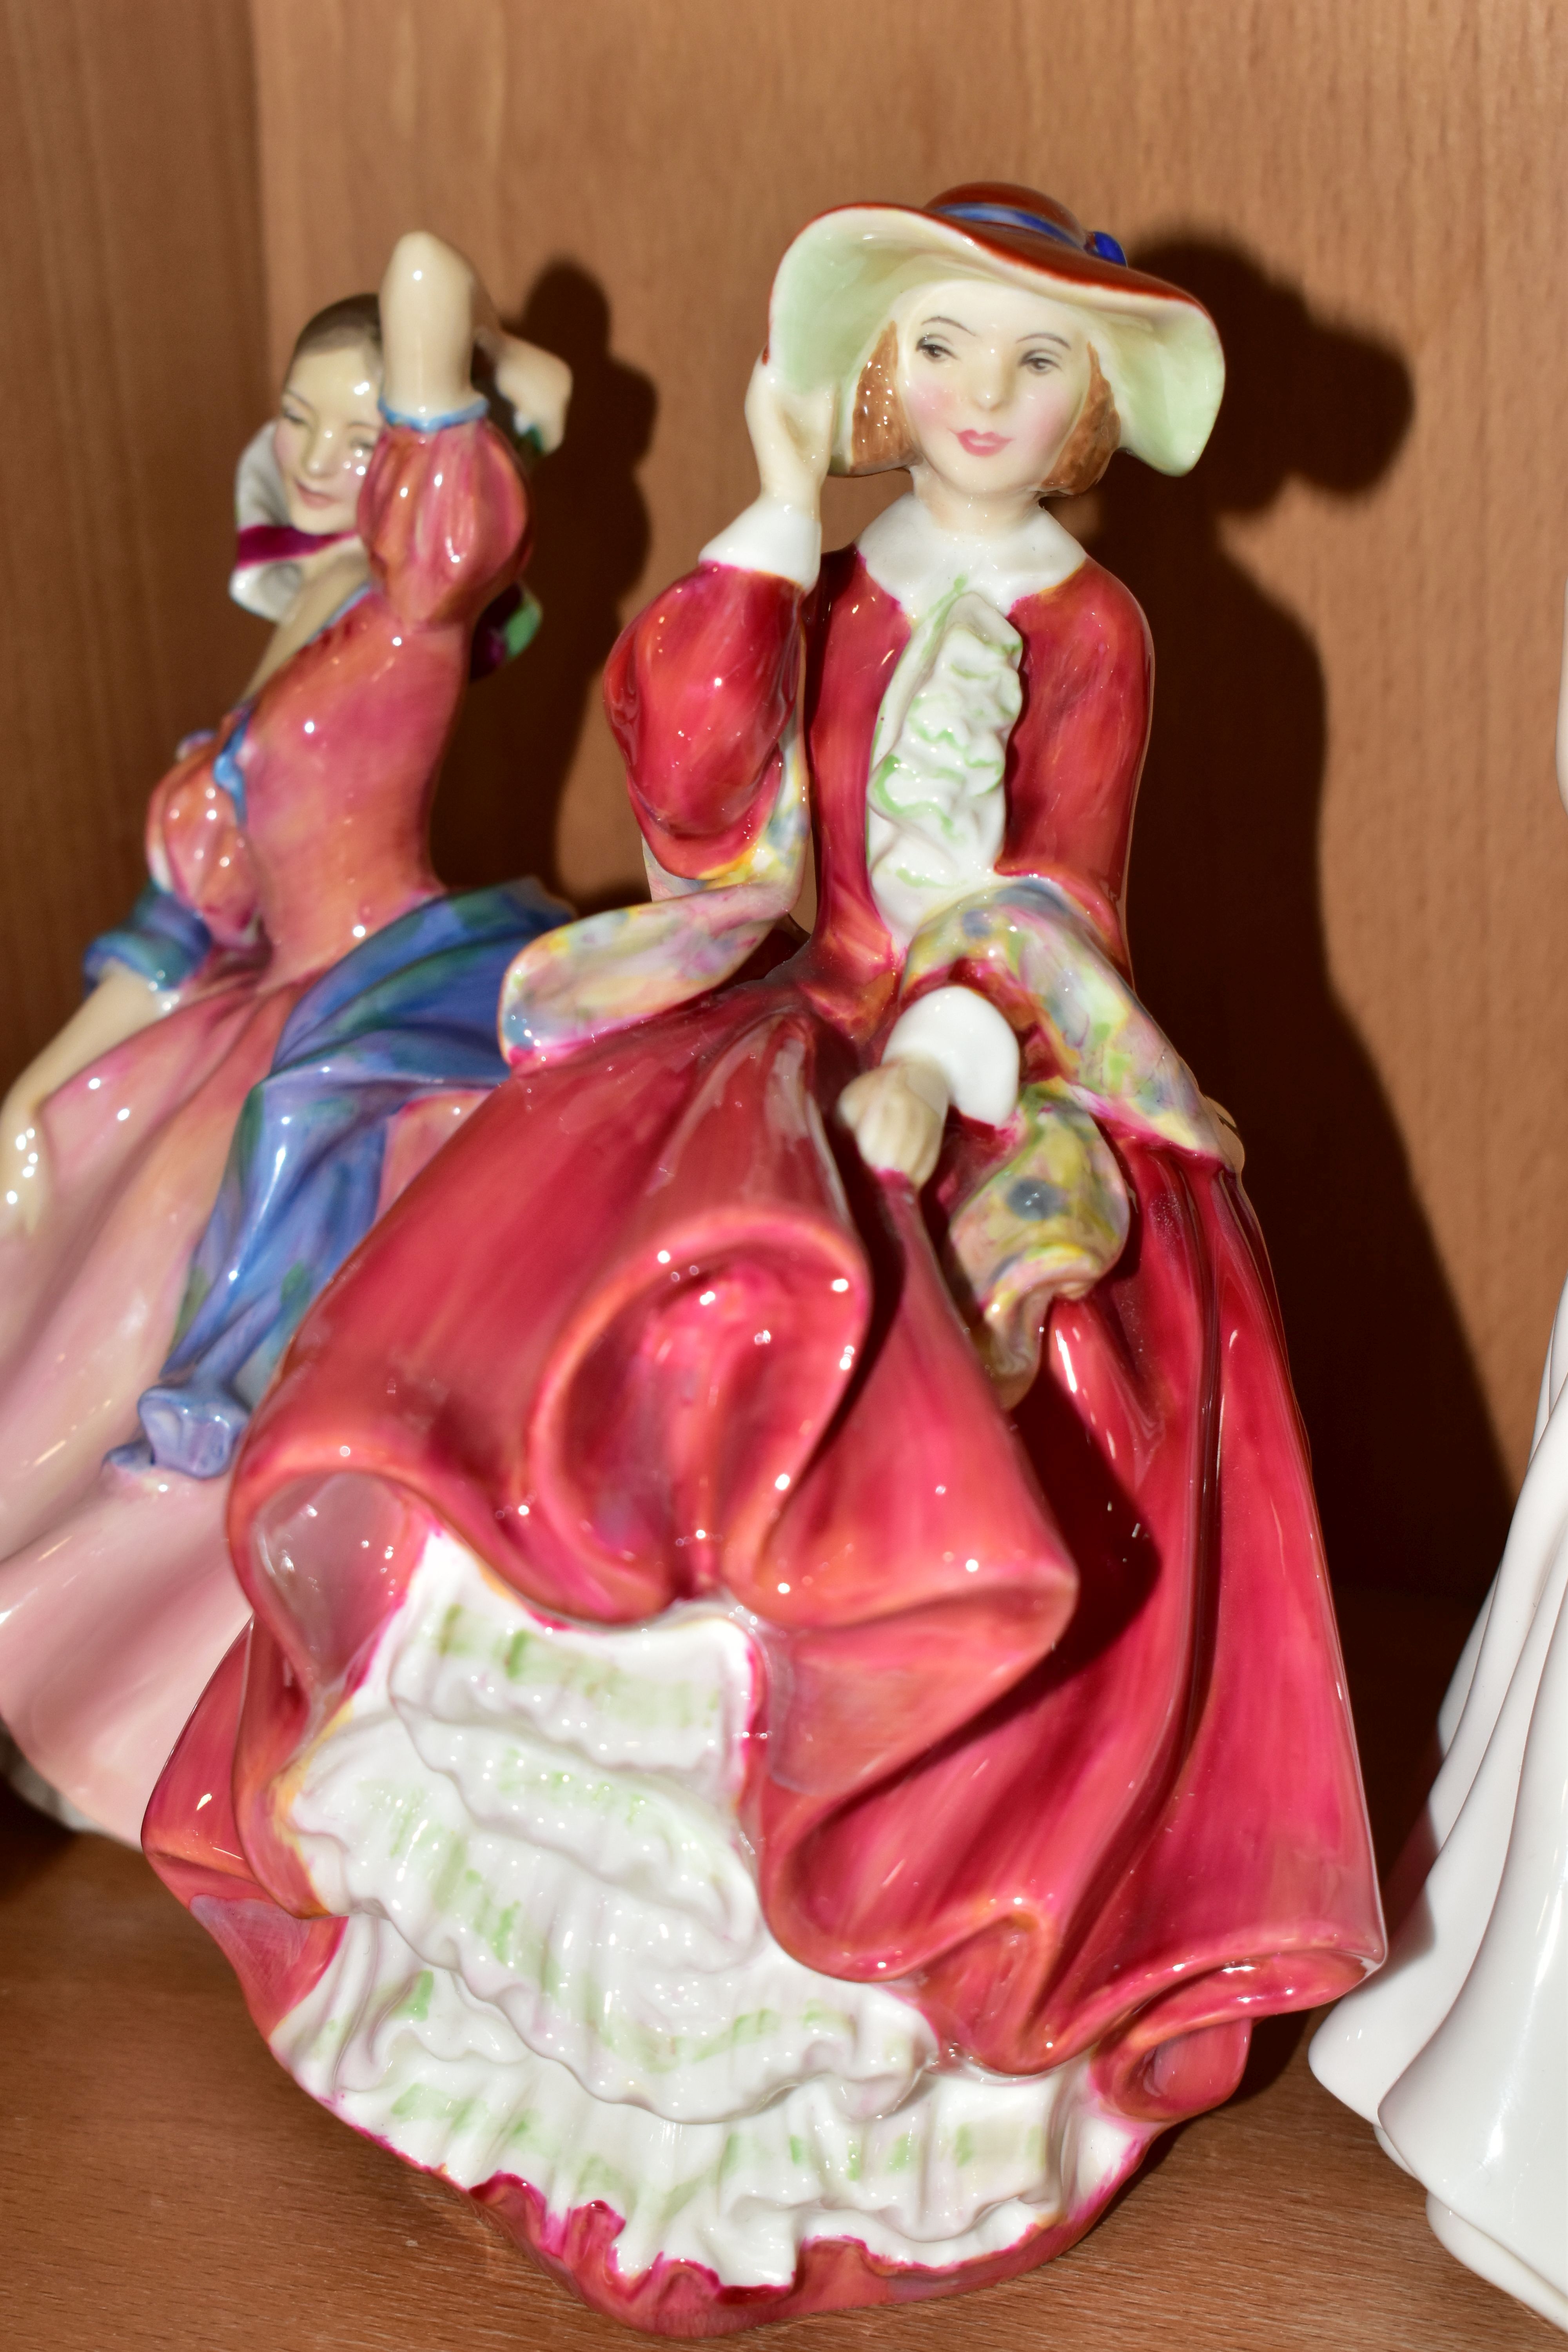 SIX ROYAL DOULTON FIGURINES, comprising 'Clarissa' HN2345 (extensive crazing and cracked), ' - Image 7 of 9